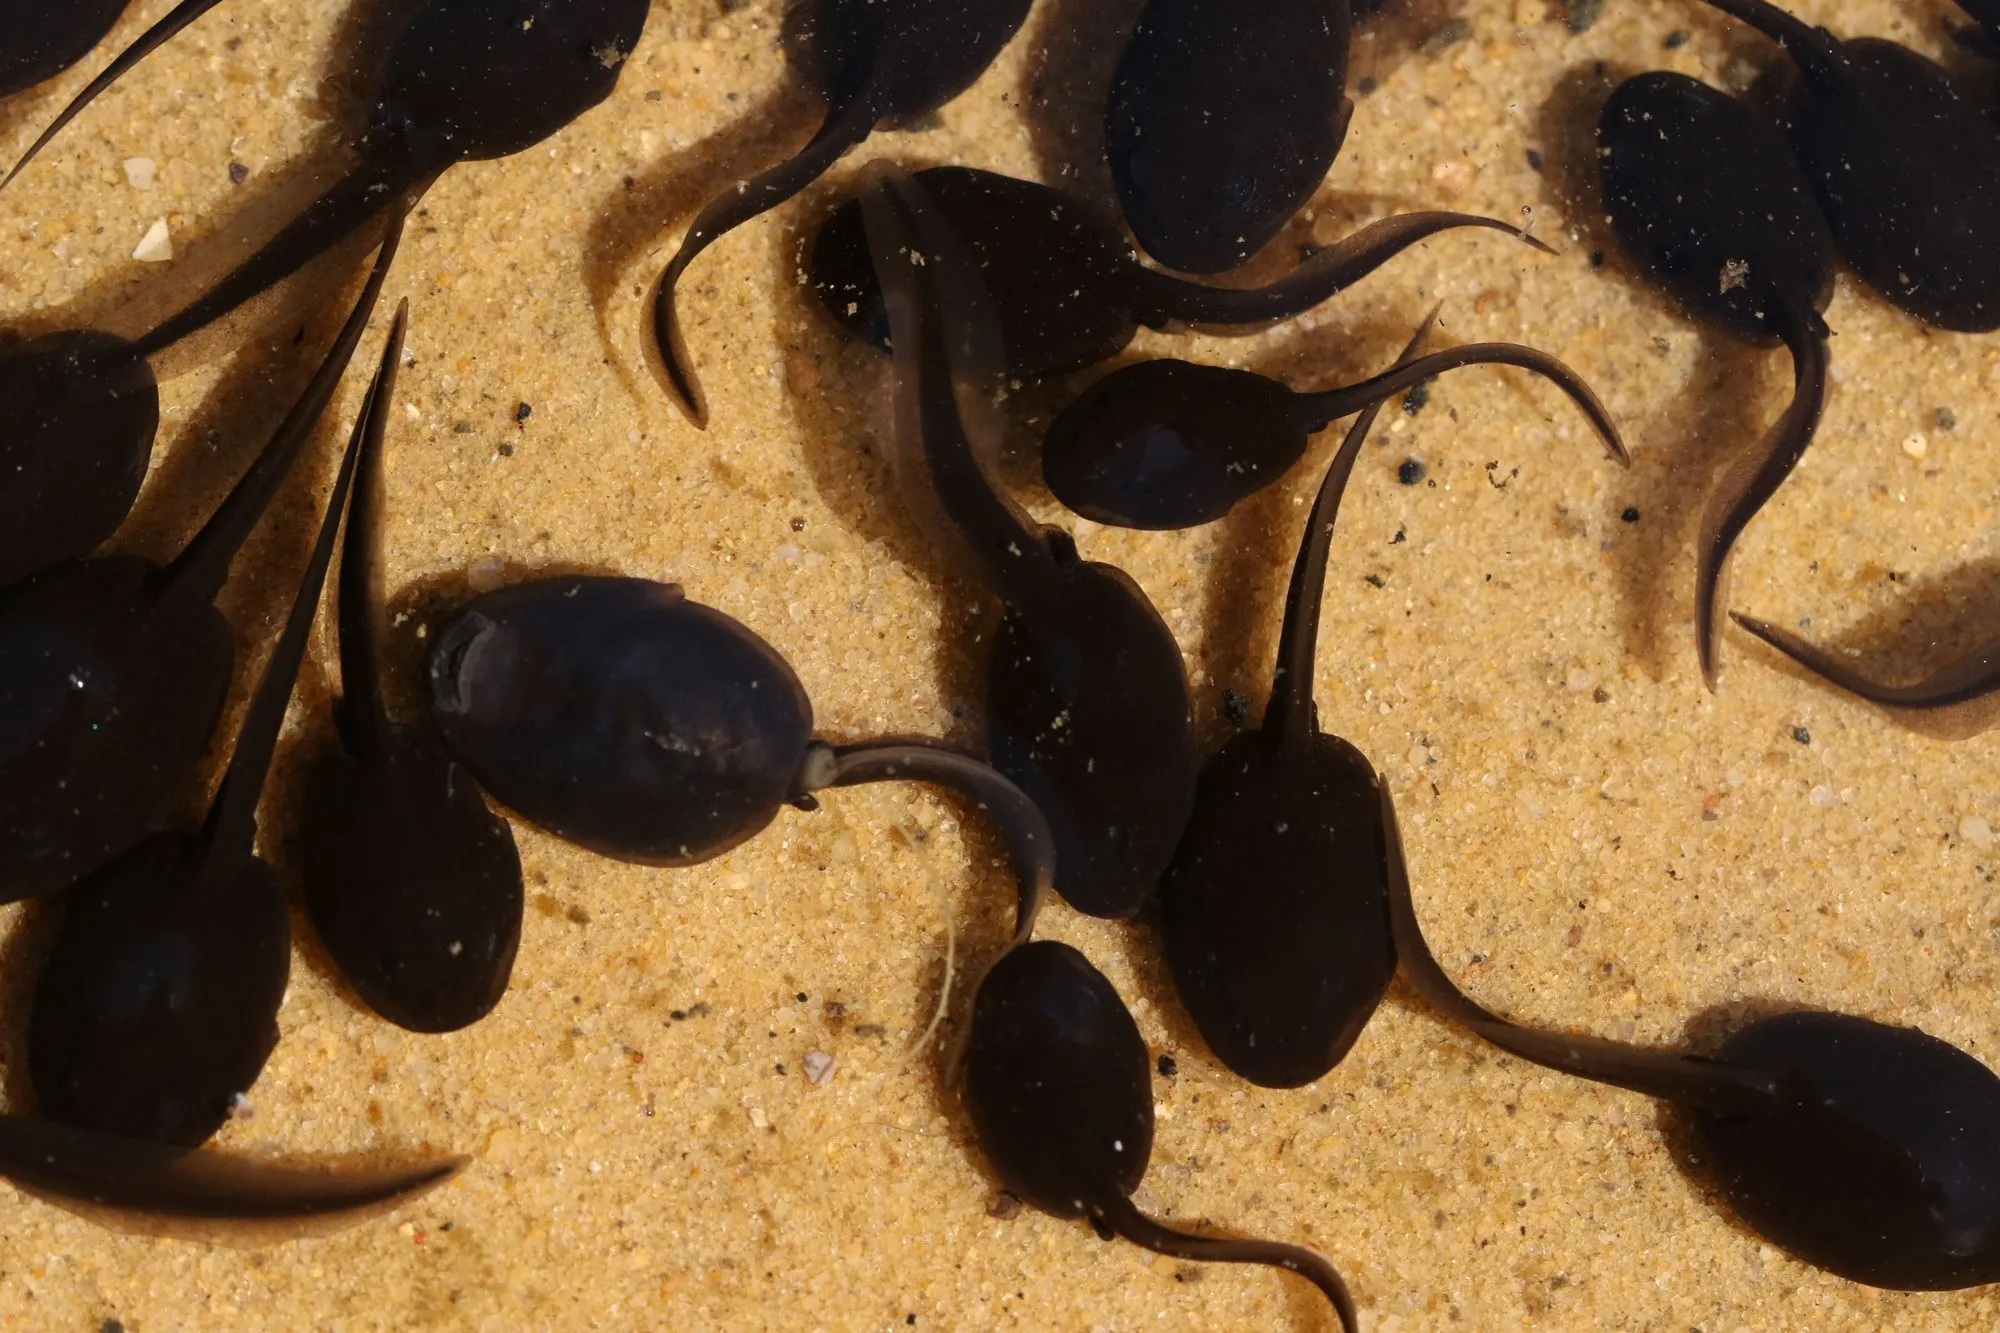 A tadpole life cycle starts when a female frog lays eggs.